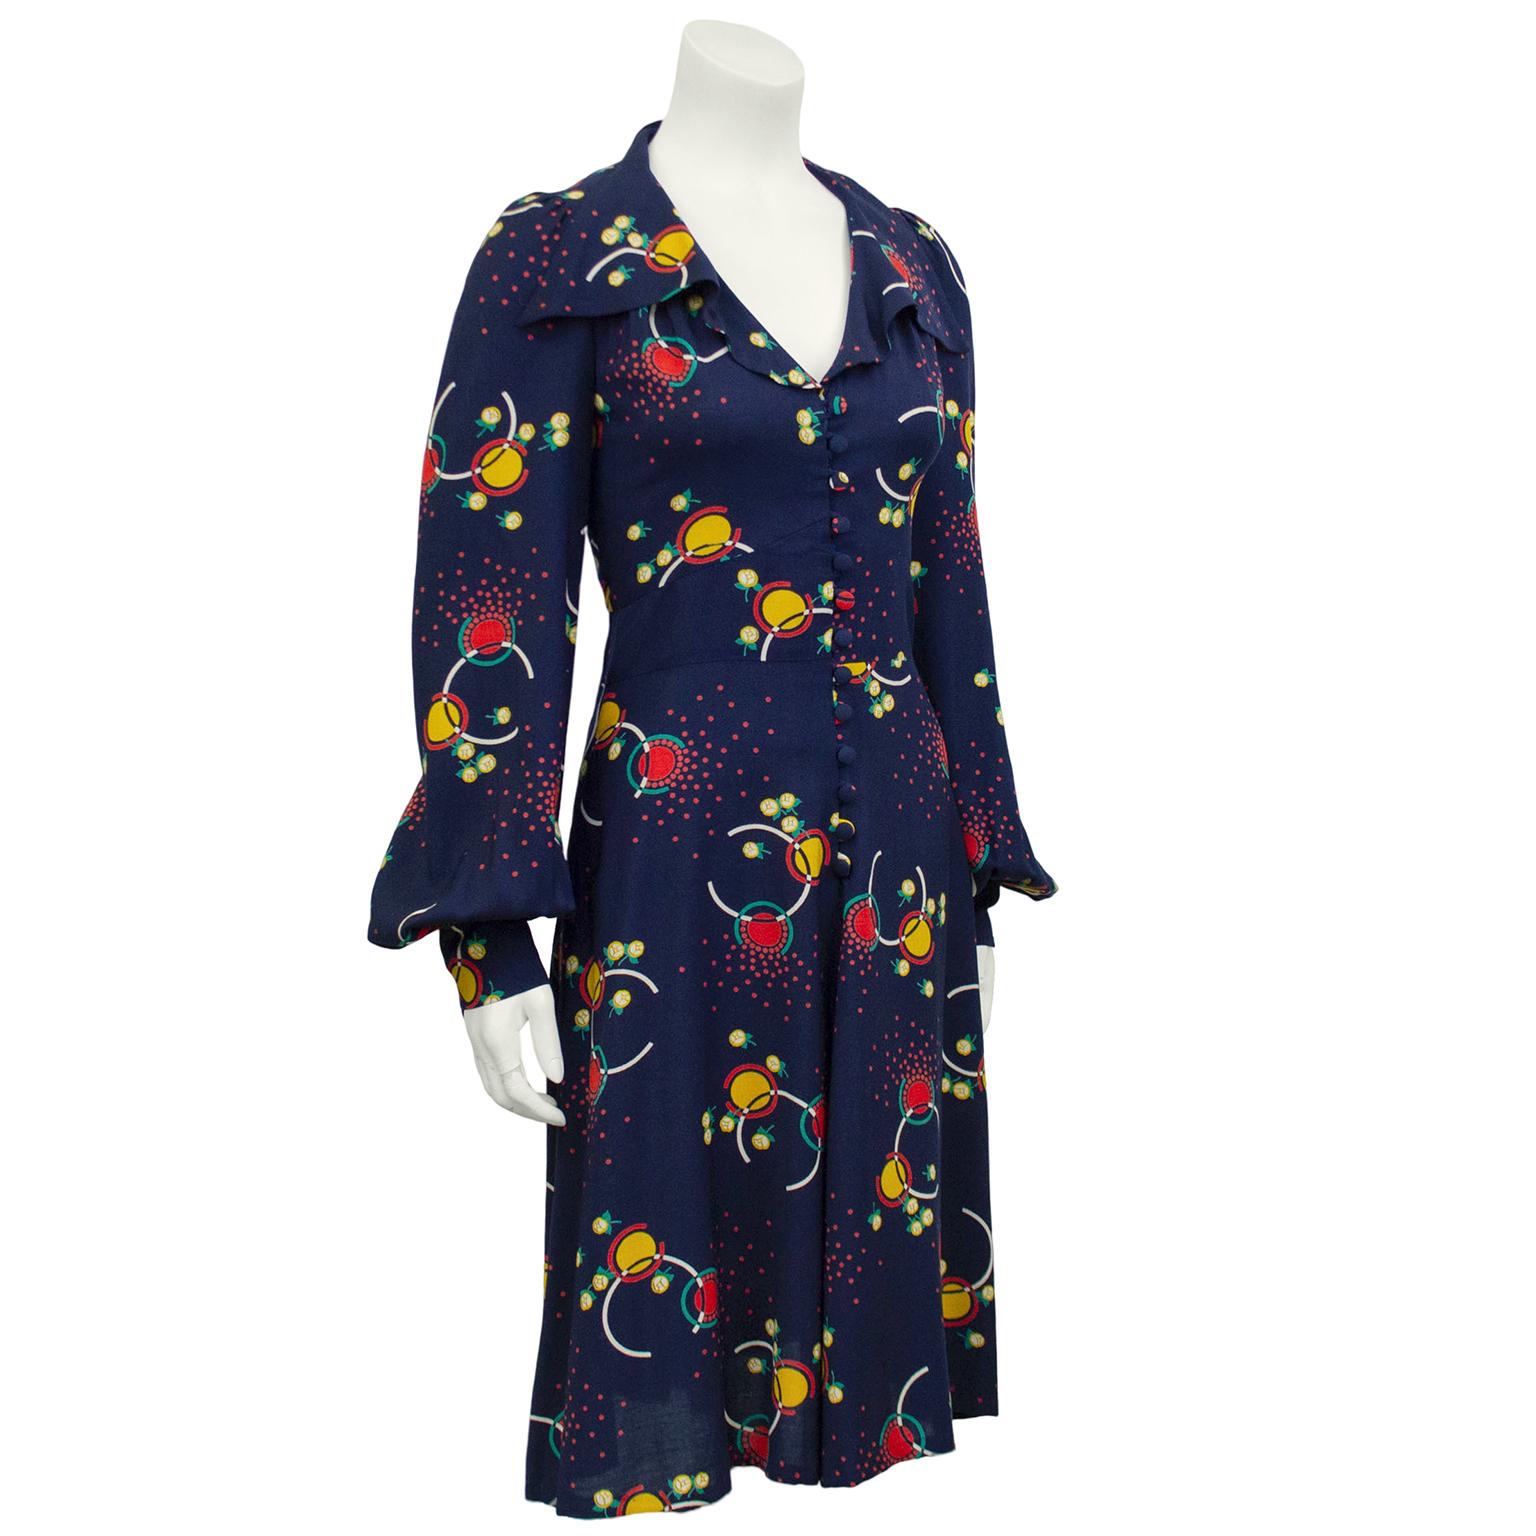 Amazing Bus Stop by Lee Bender day dress. Rayon navy blue with a fun abstract floral print in yellow, red, white and green. Oversized. loose lapels create a slight ruffle effect. V neckline and bishop sleeves. Covered buttons down centre and loose